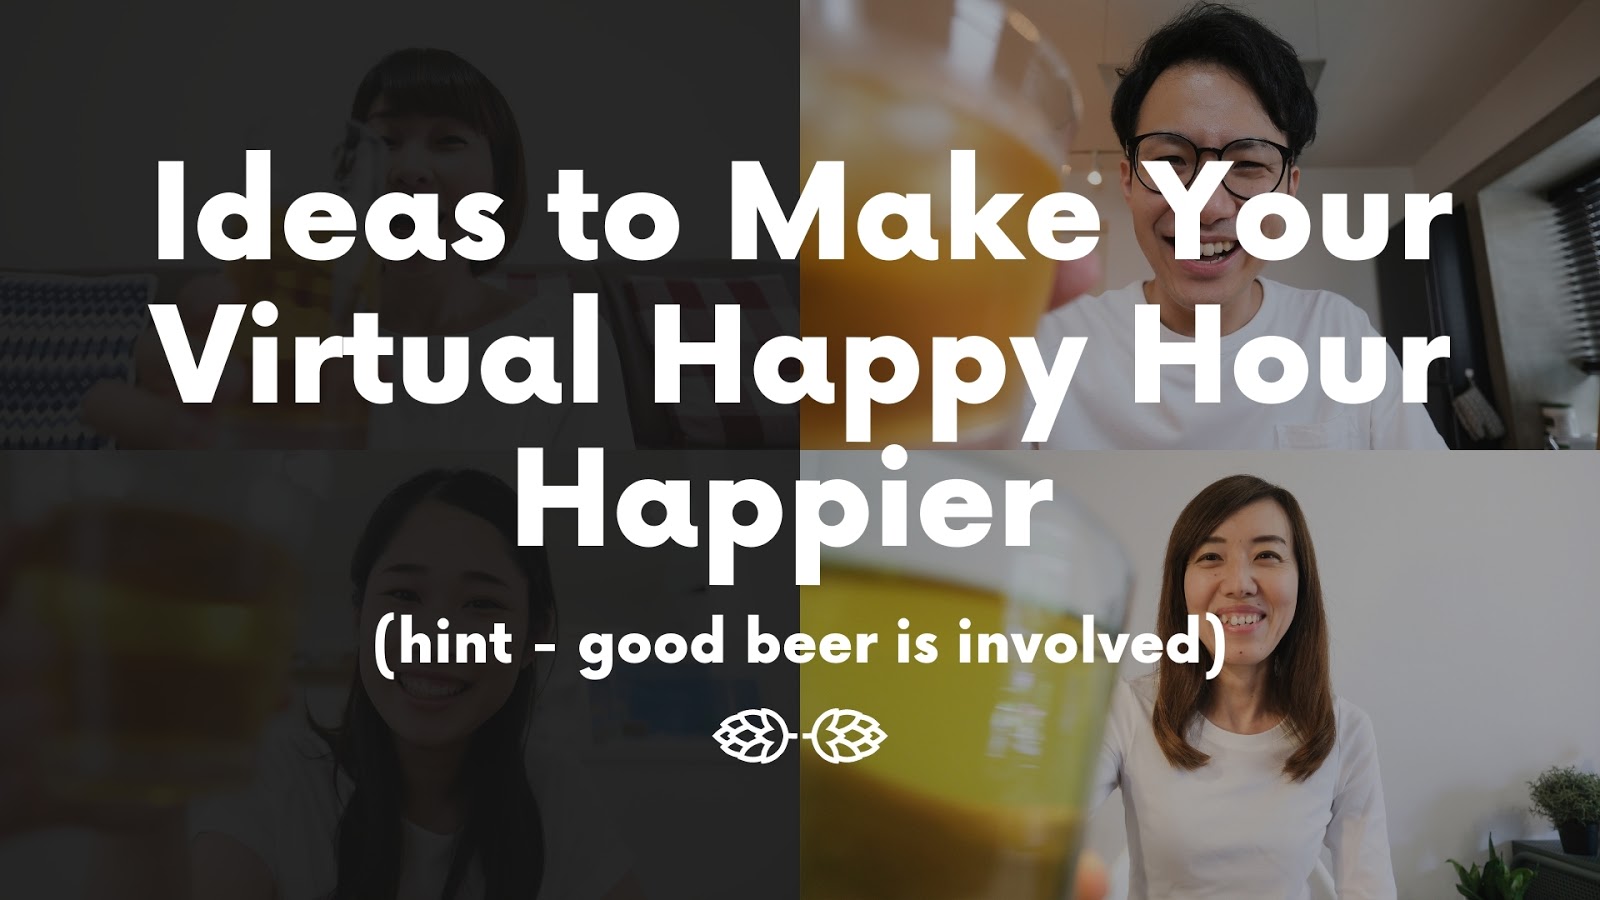 Ideas to Make Your Virtual Happy Hour Happier